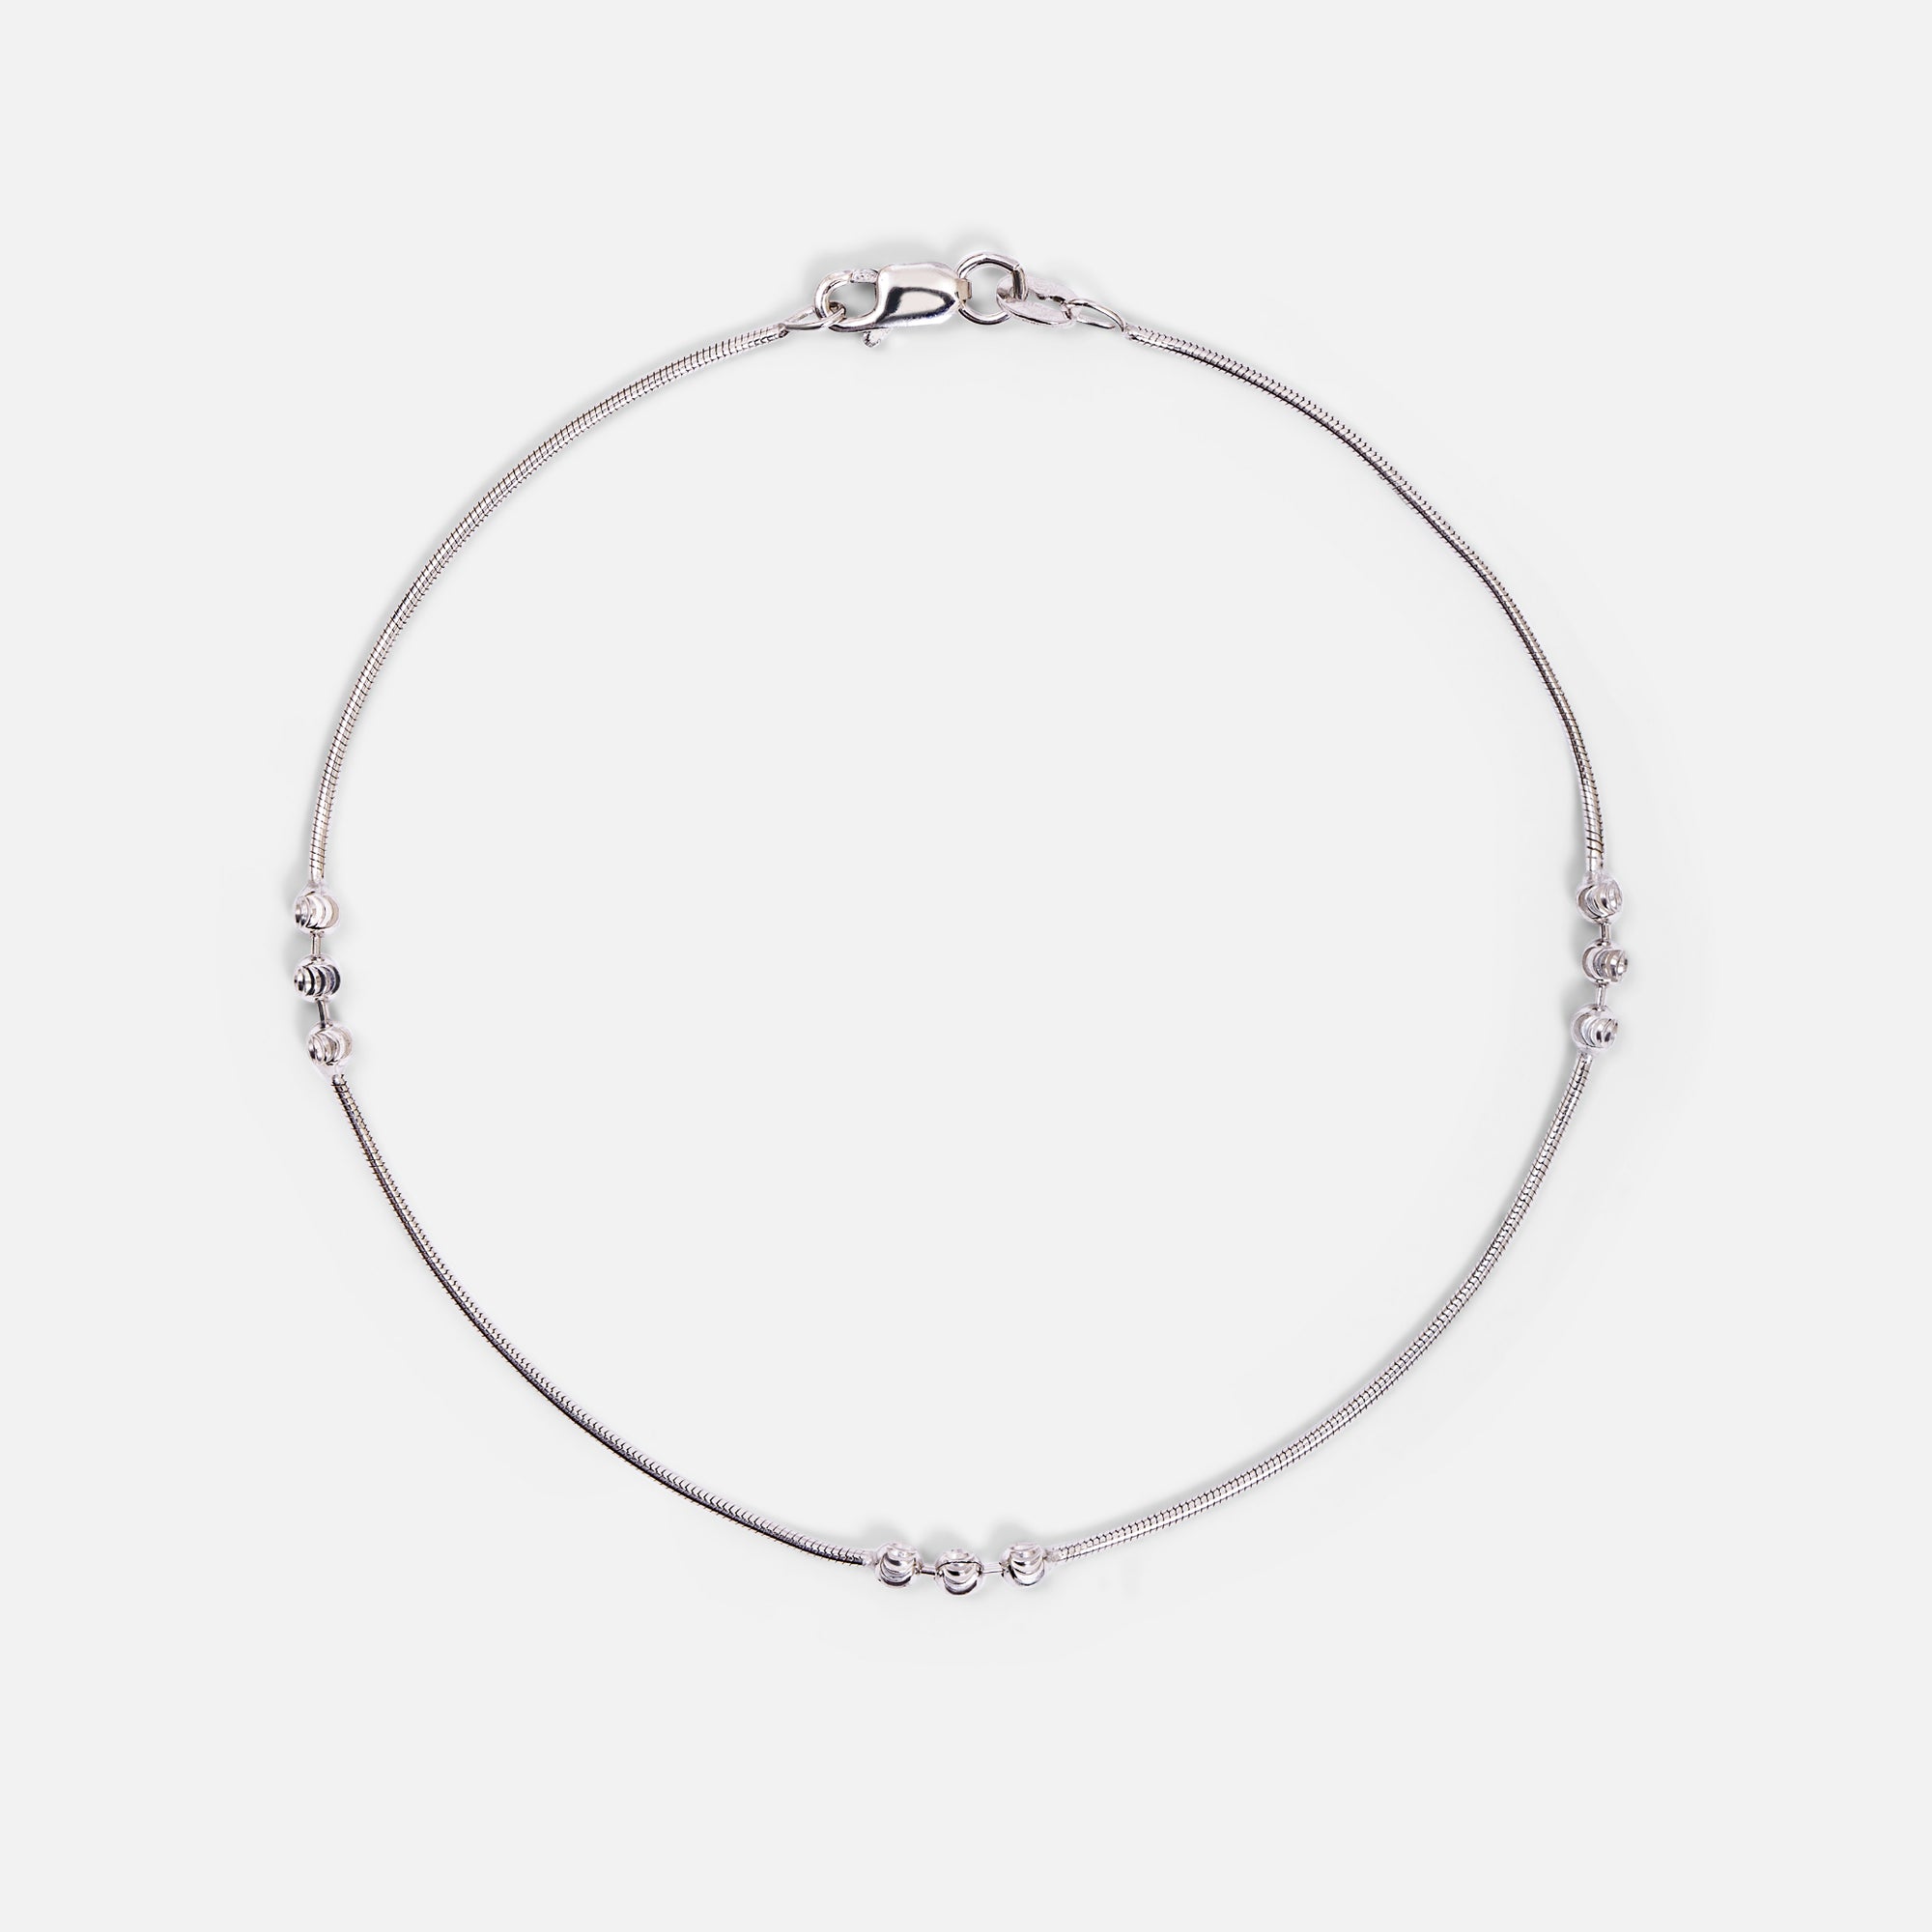 Sterling silver anklet chain with beads